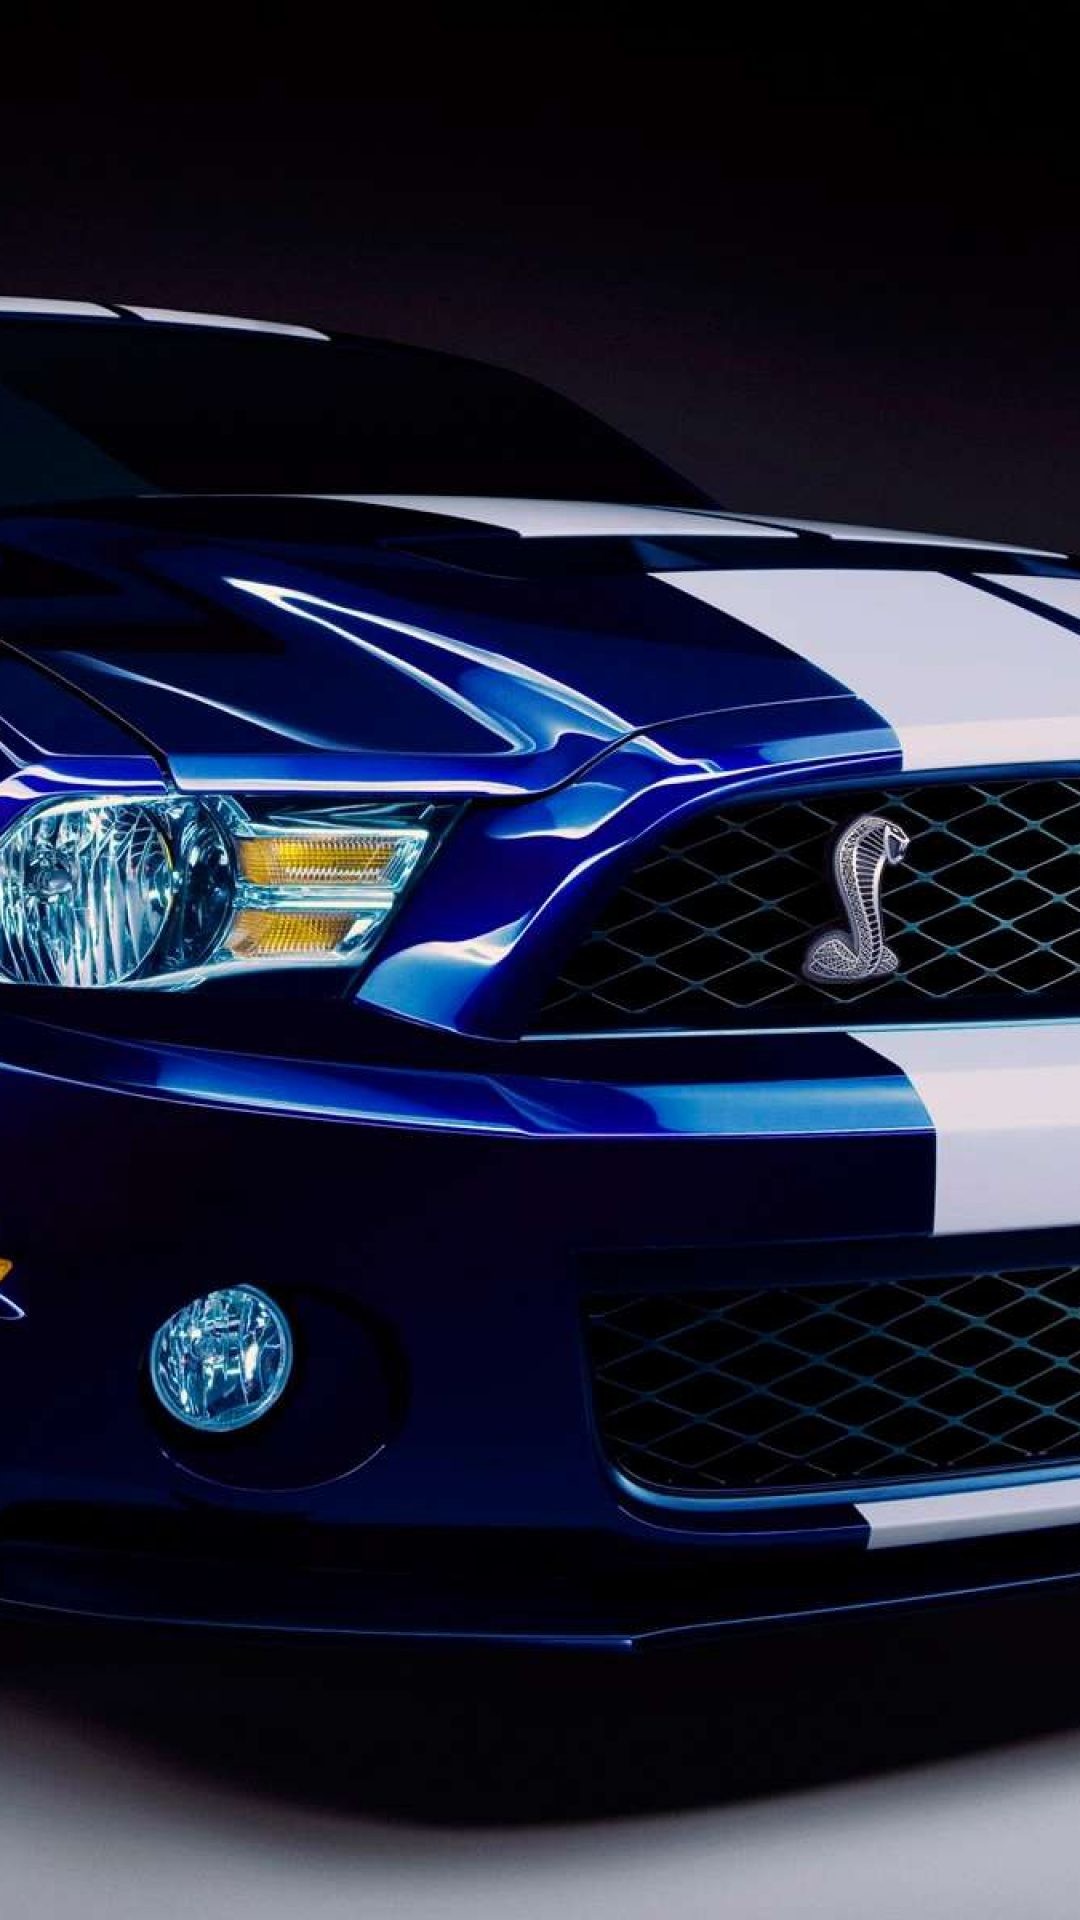 1080x1920 Ford Shelby Gt500 Wallpaper Hd